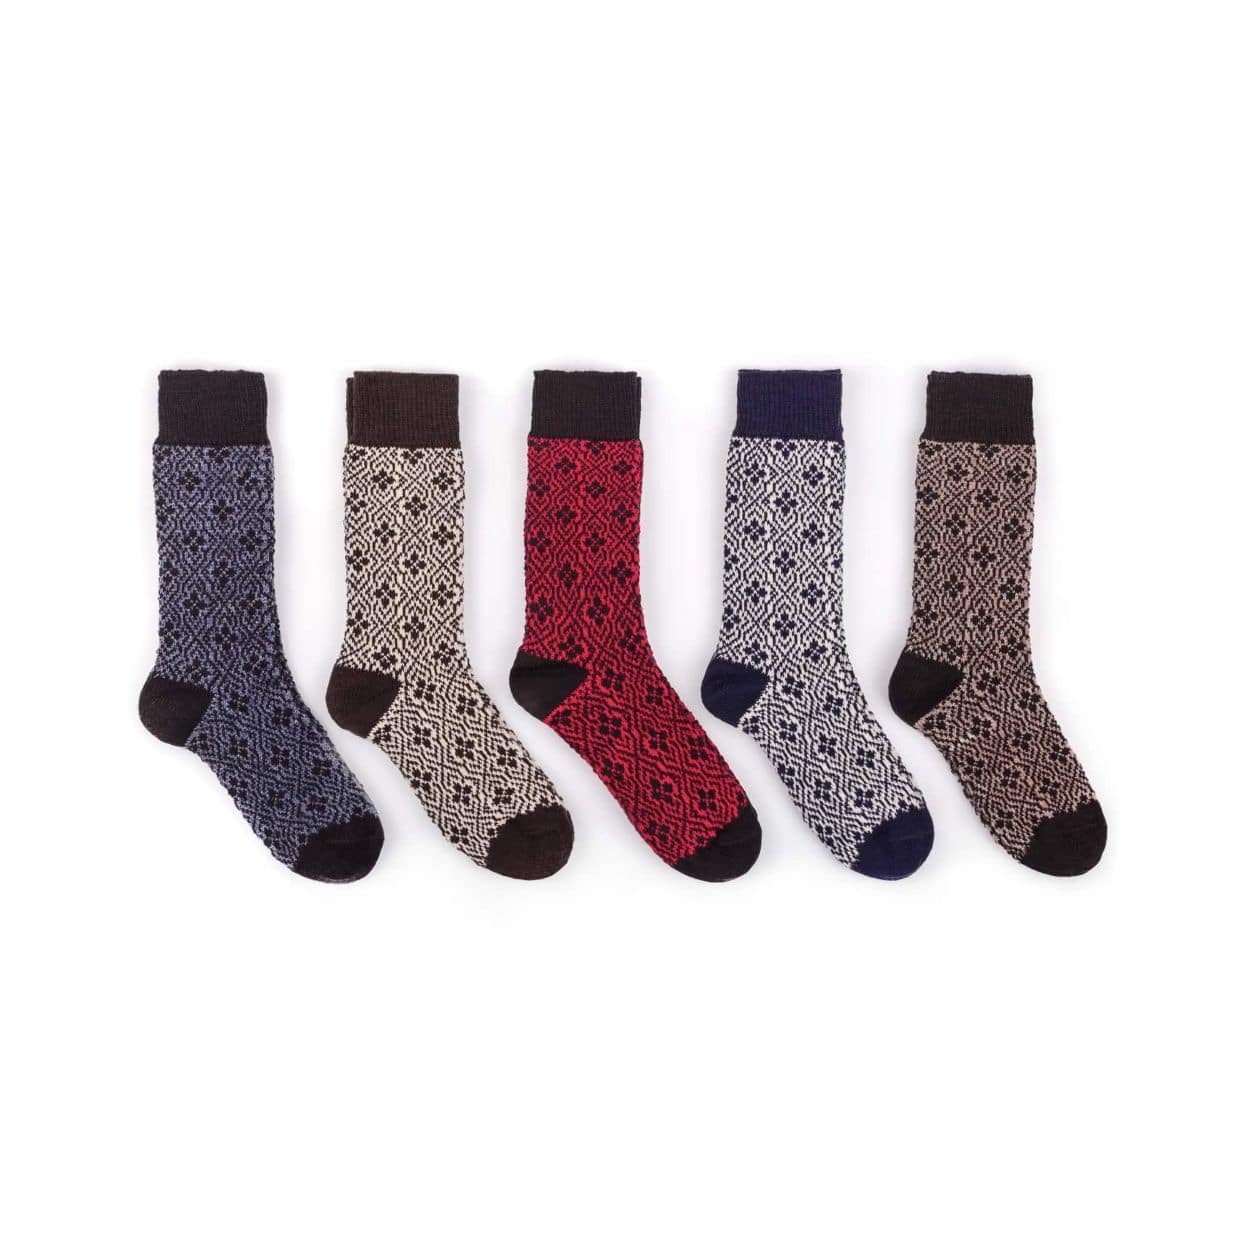 RoToTo Comfy Room Socks “Nordic” - Charcoal · Those That Know